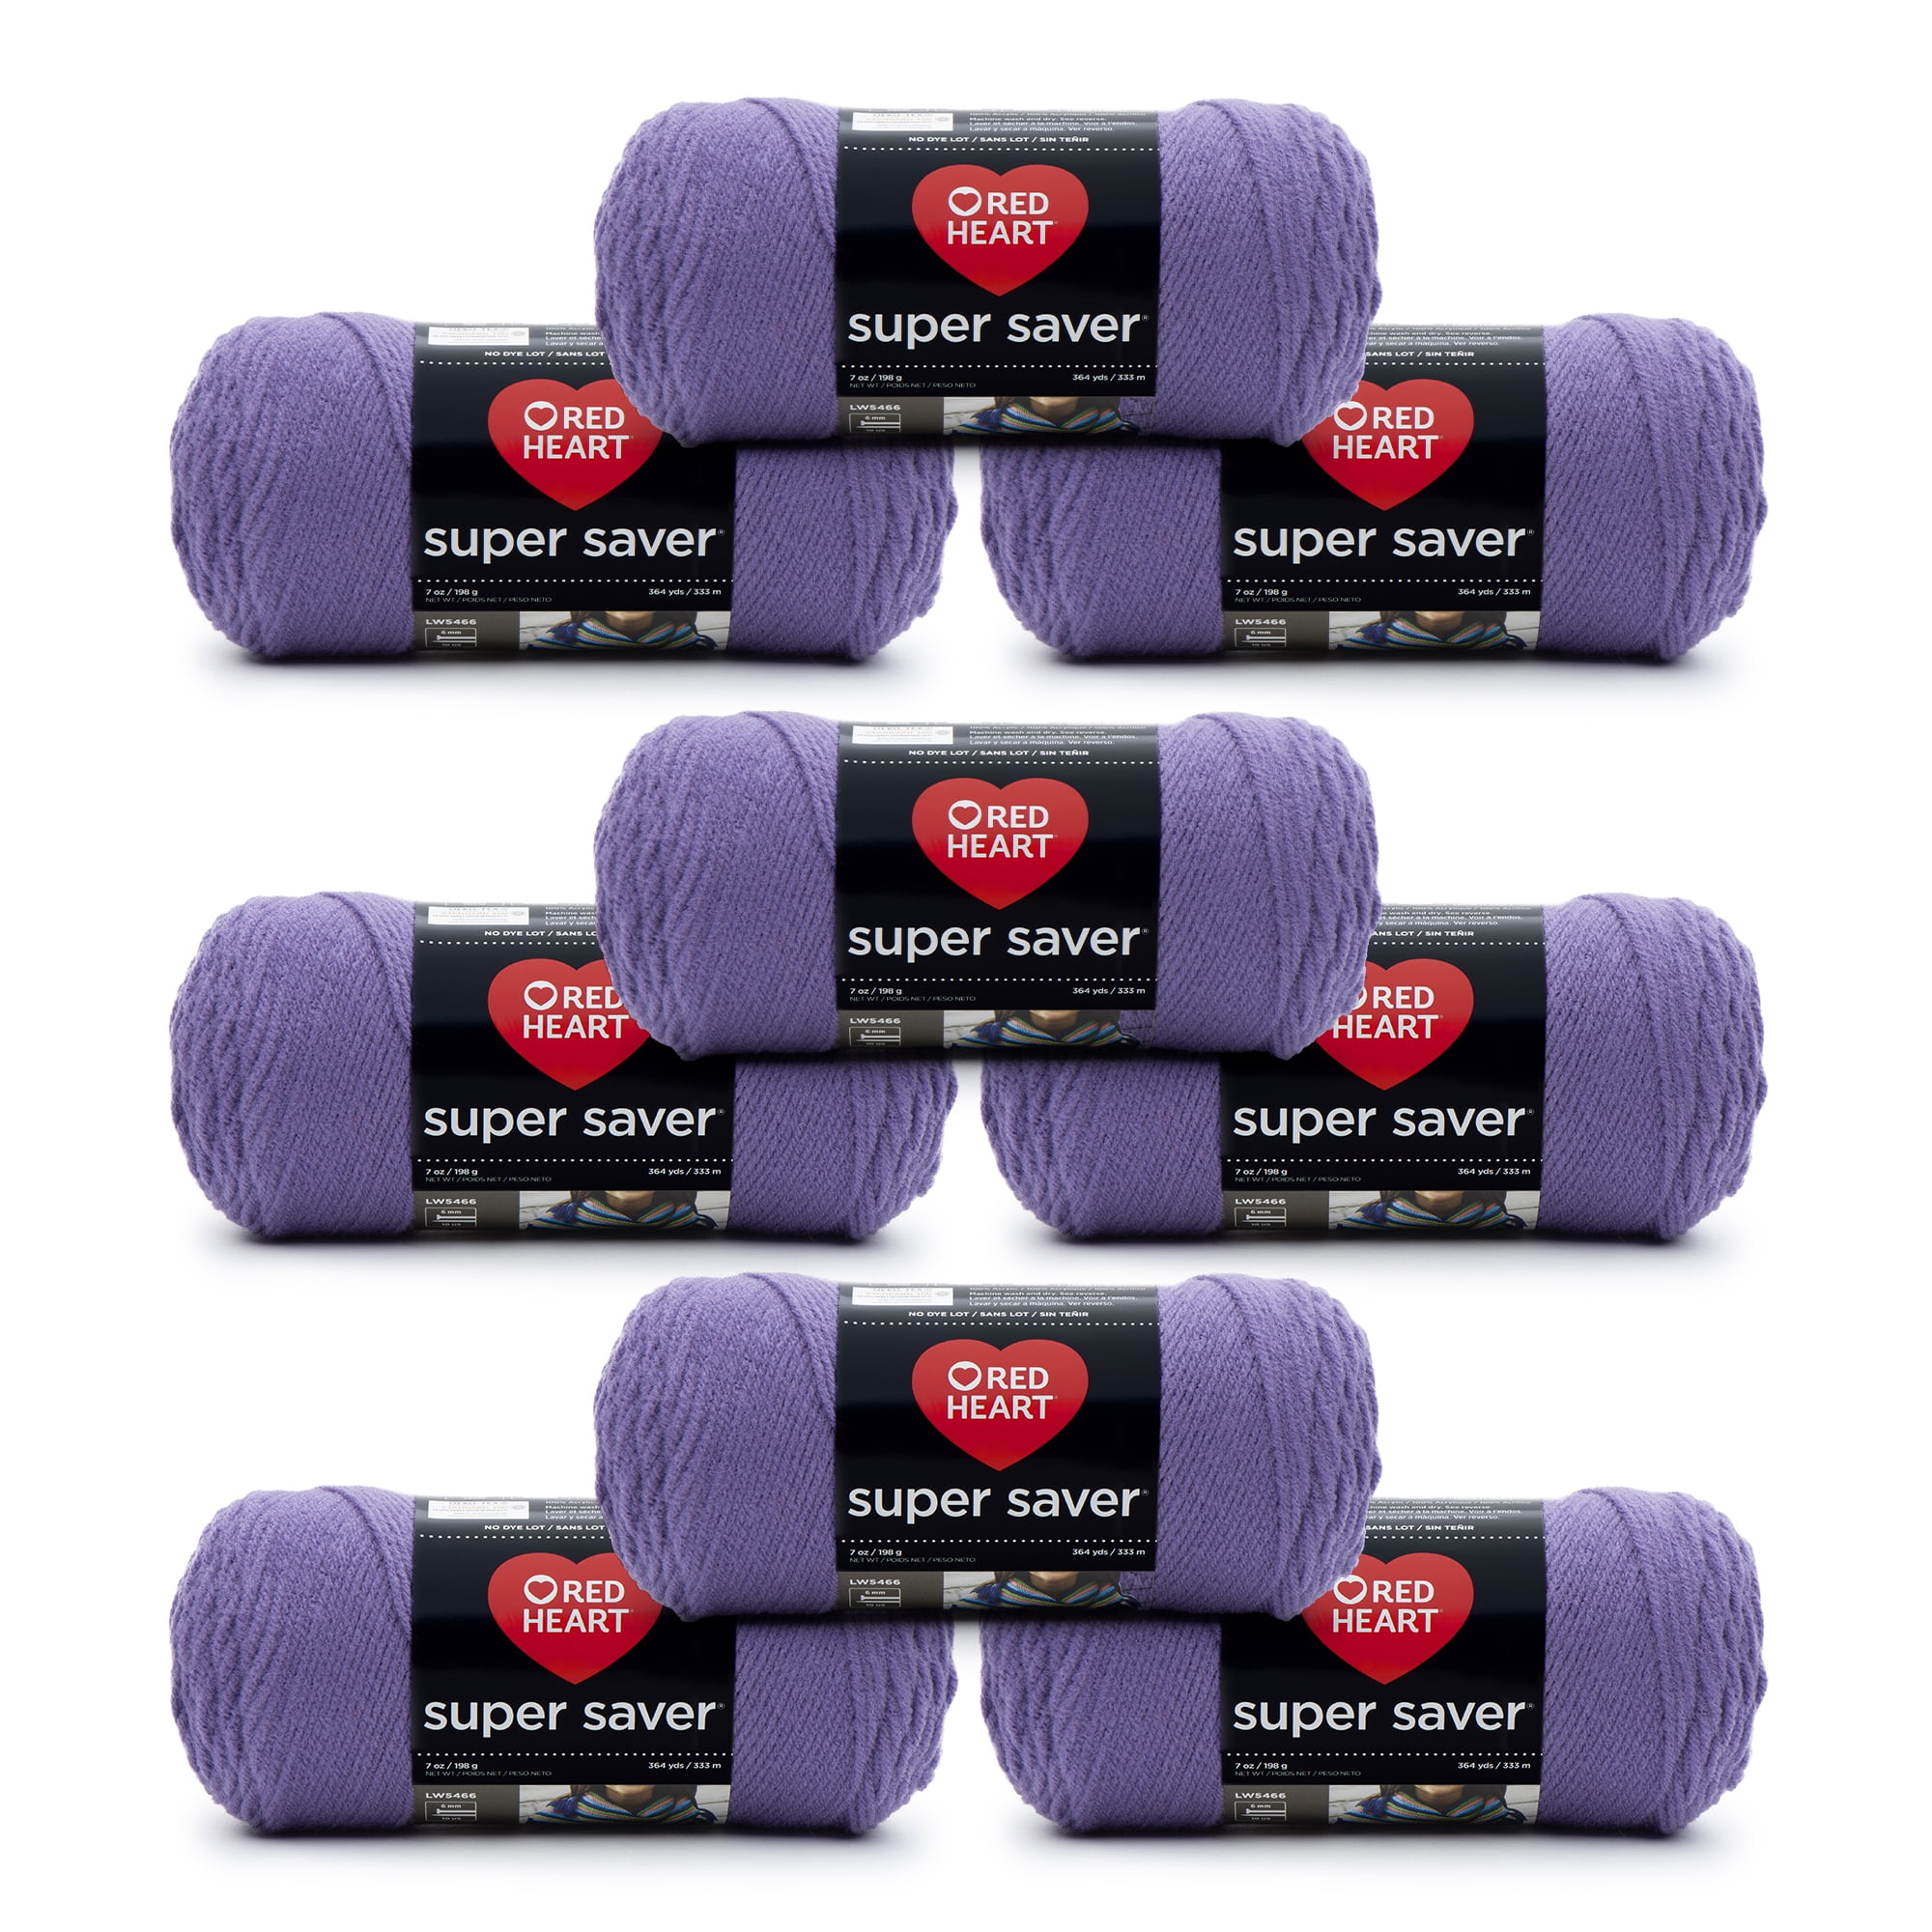 Red Heart Super Saver Yarn Crafts Knitting 100% Acrylic White & Cherry Red  Lot 73650878732